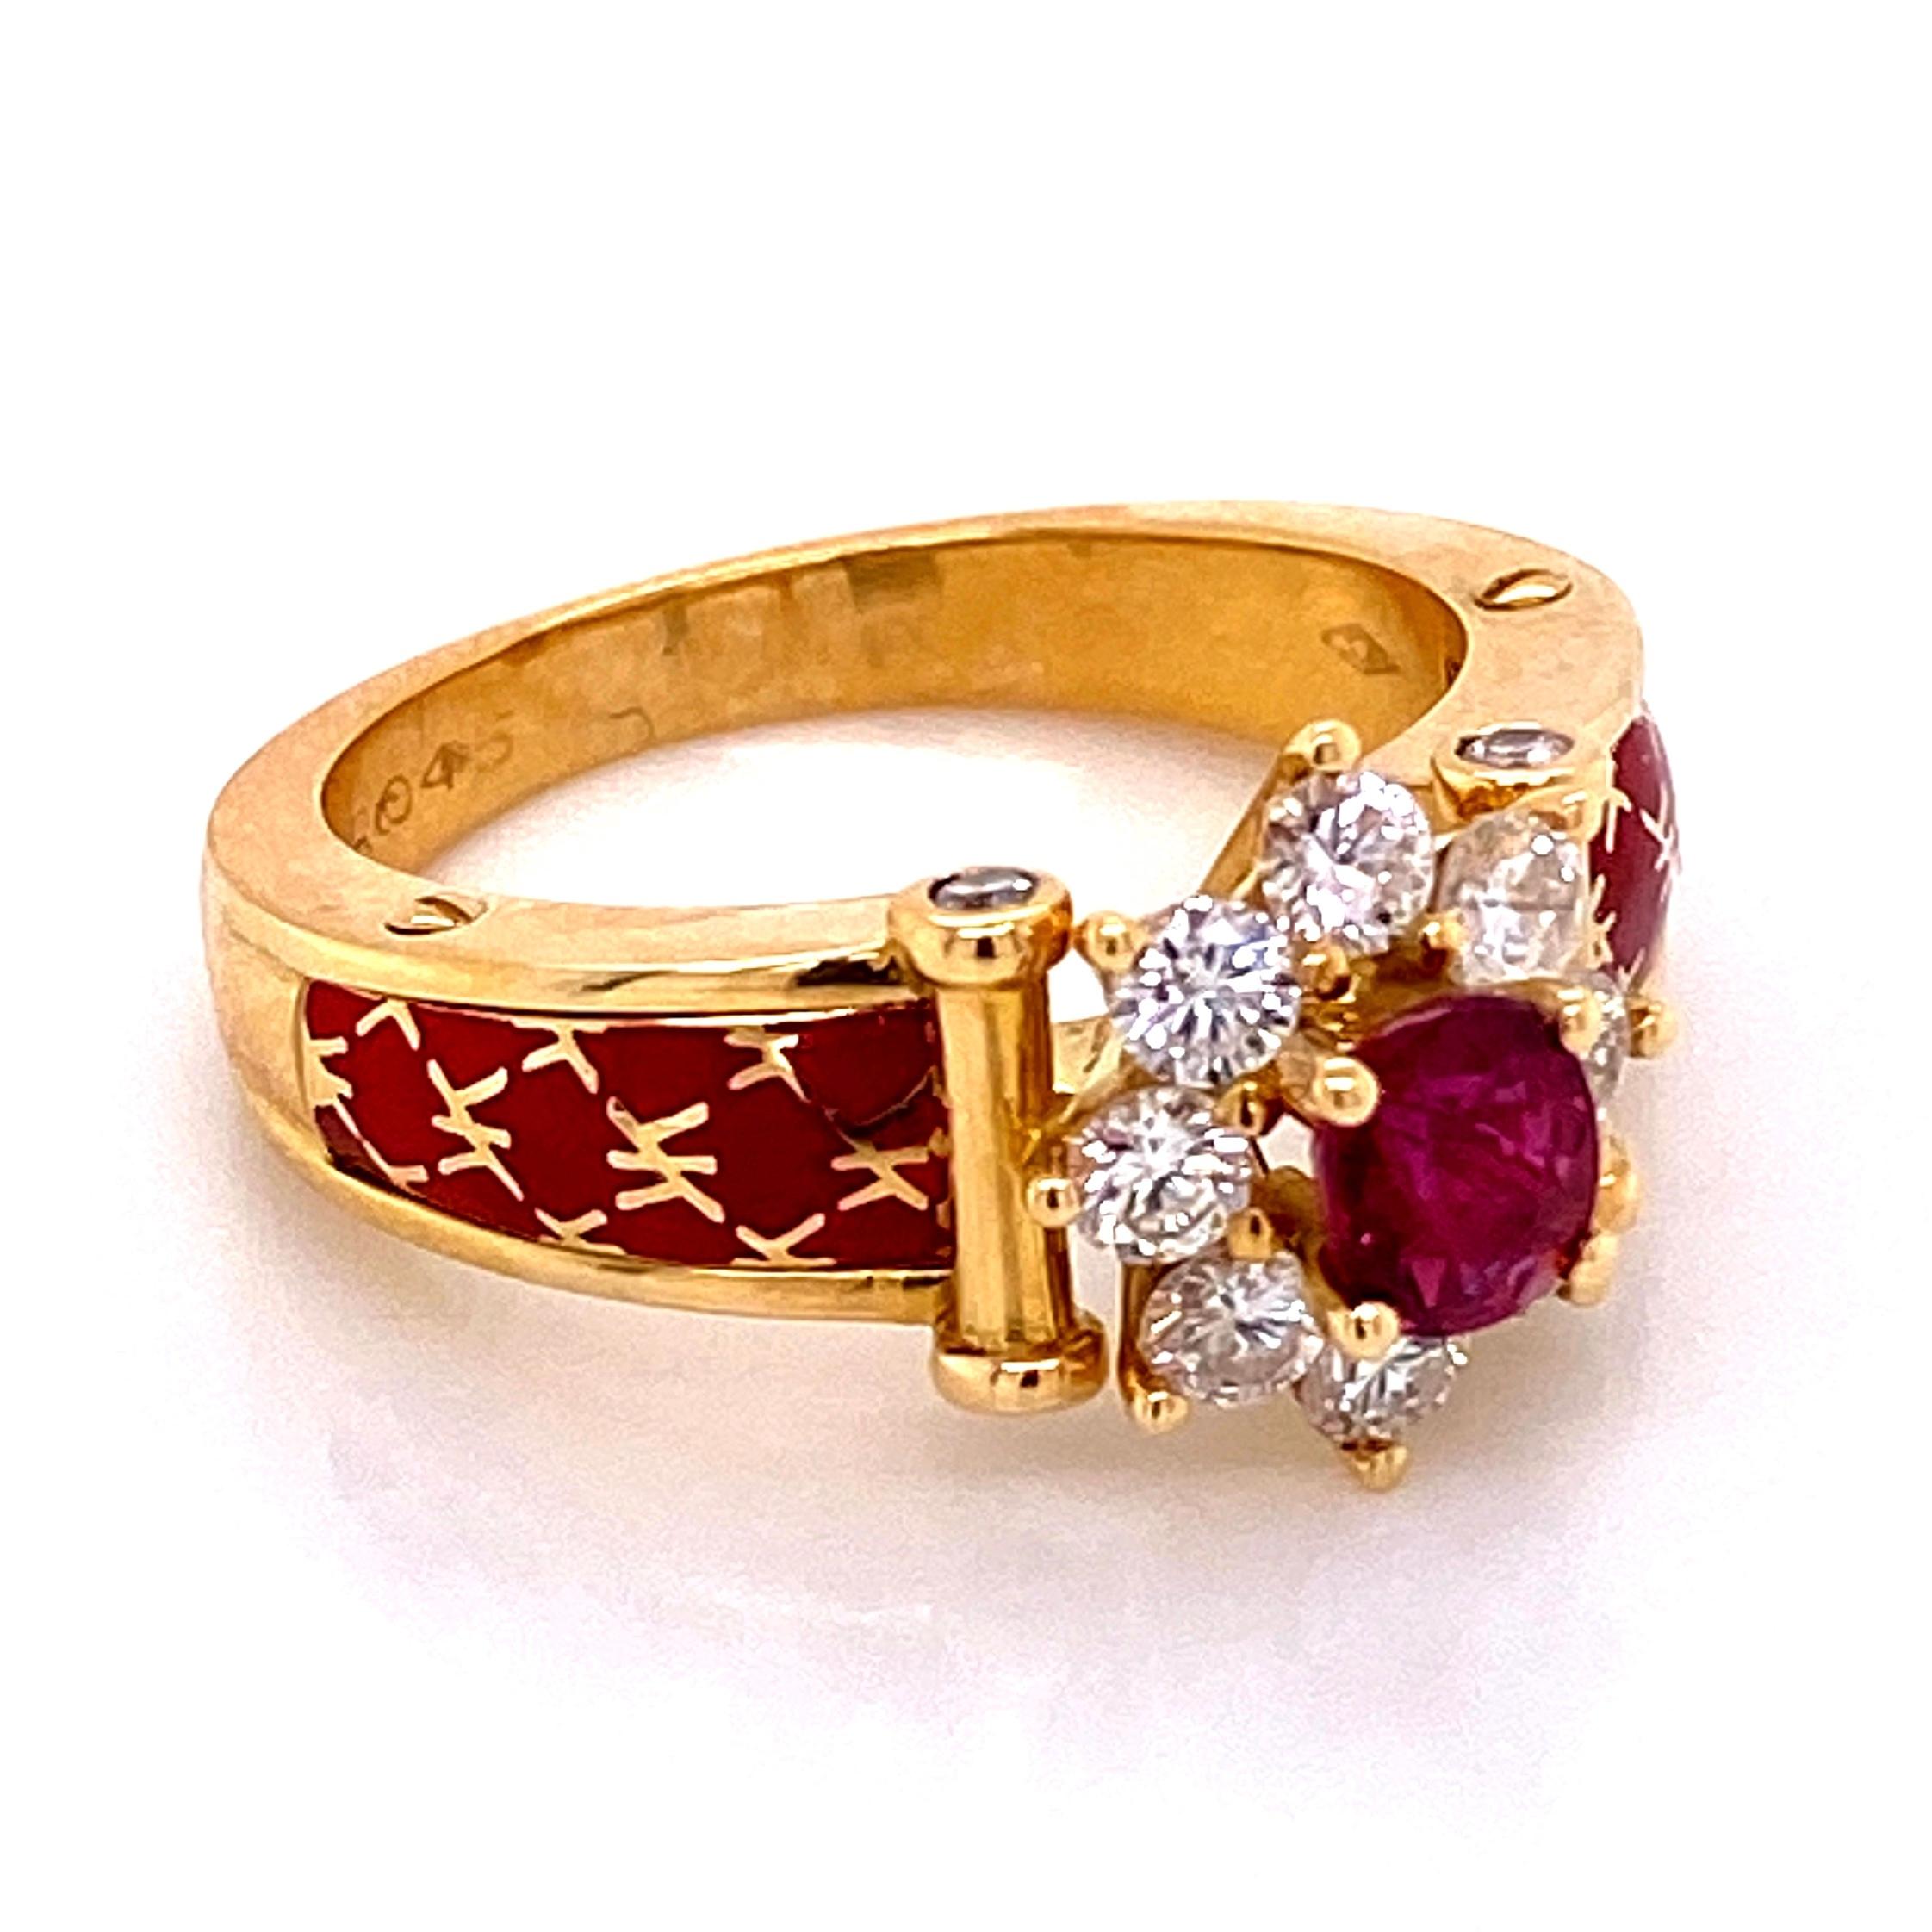 Simply Beautiful! Stylish and finely detailed French Red Enamel ring. Centering set a securely nestled Ruby, weighing approx. 0.45 Carat, surrounded by Diamonds, weighing approx. 0.66 Carats and enhanced by Red enamel continuing down the sides of